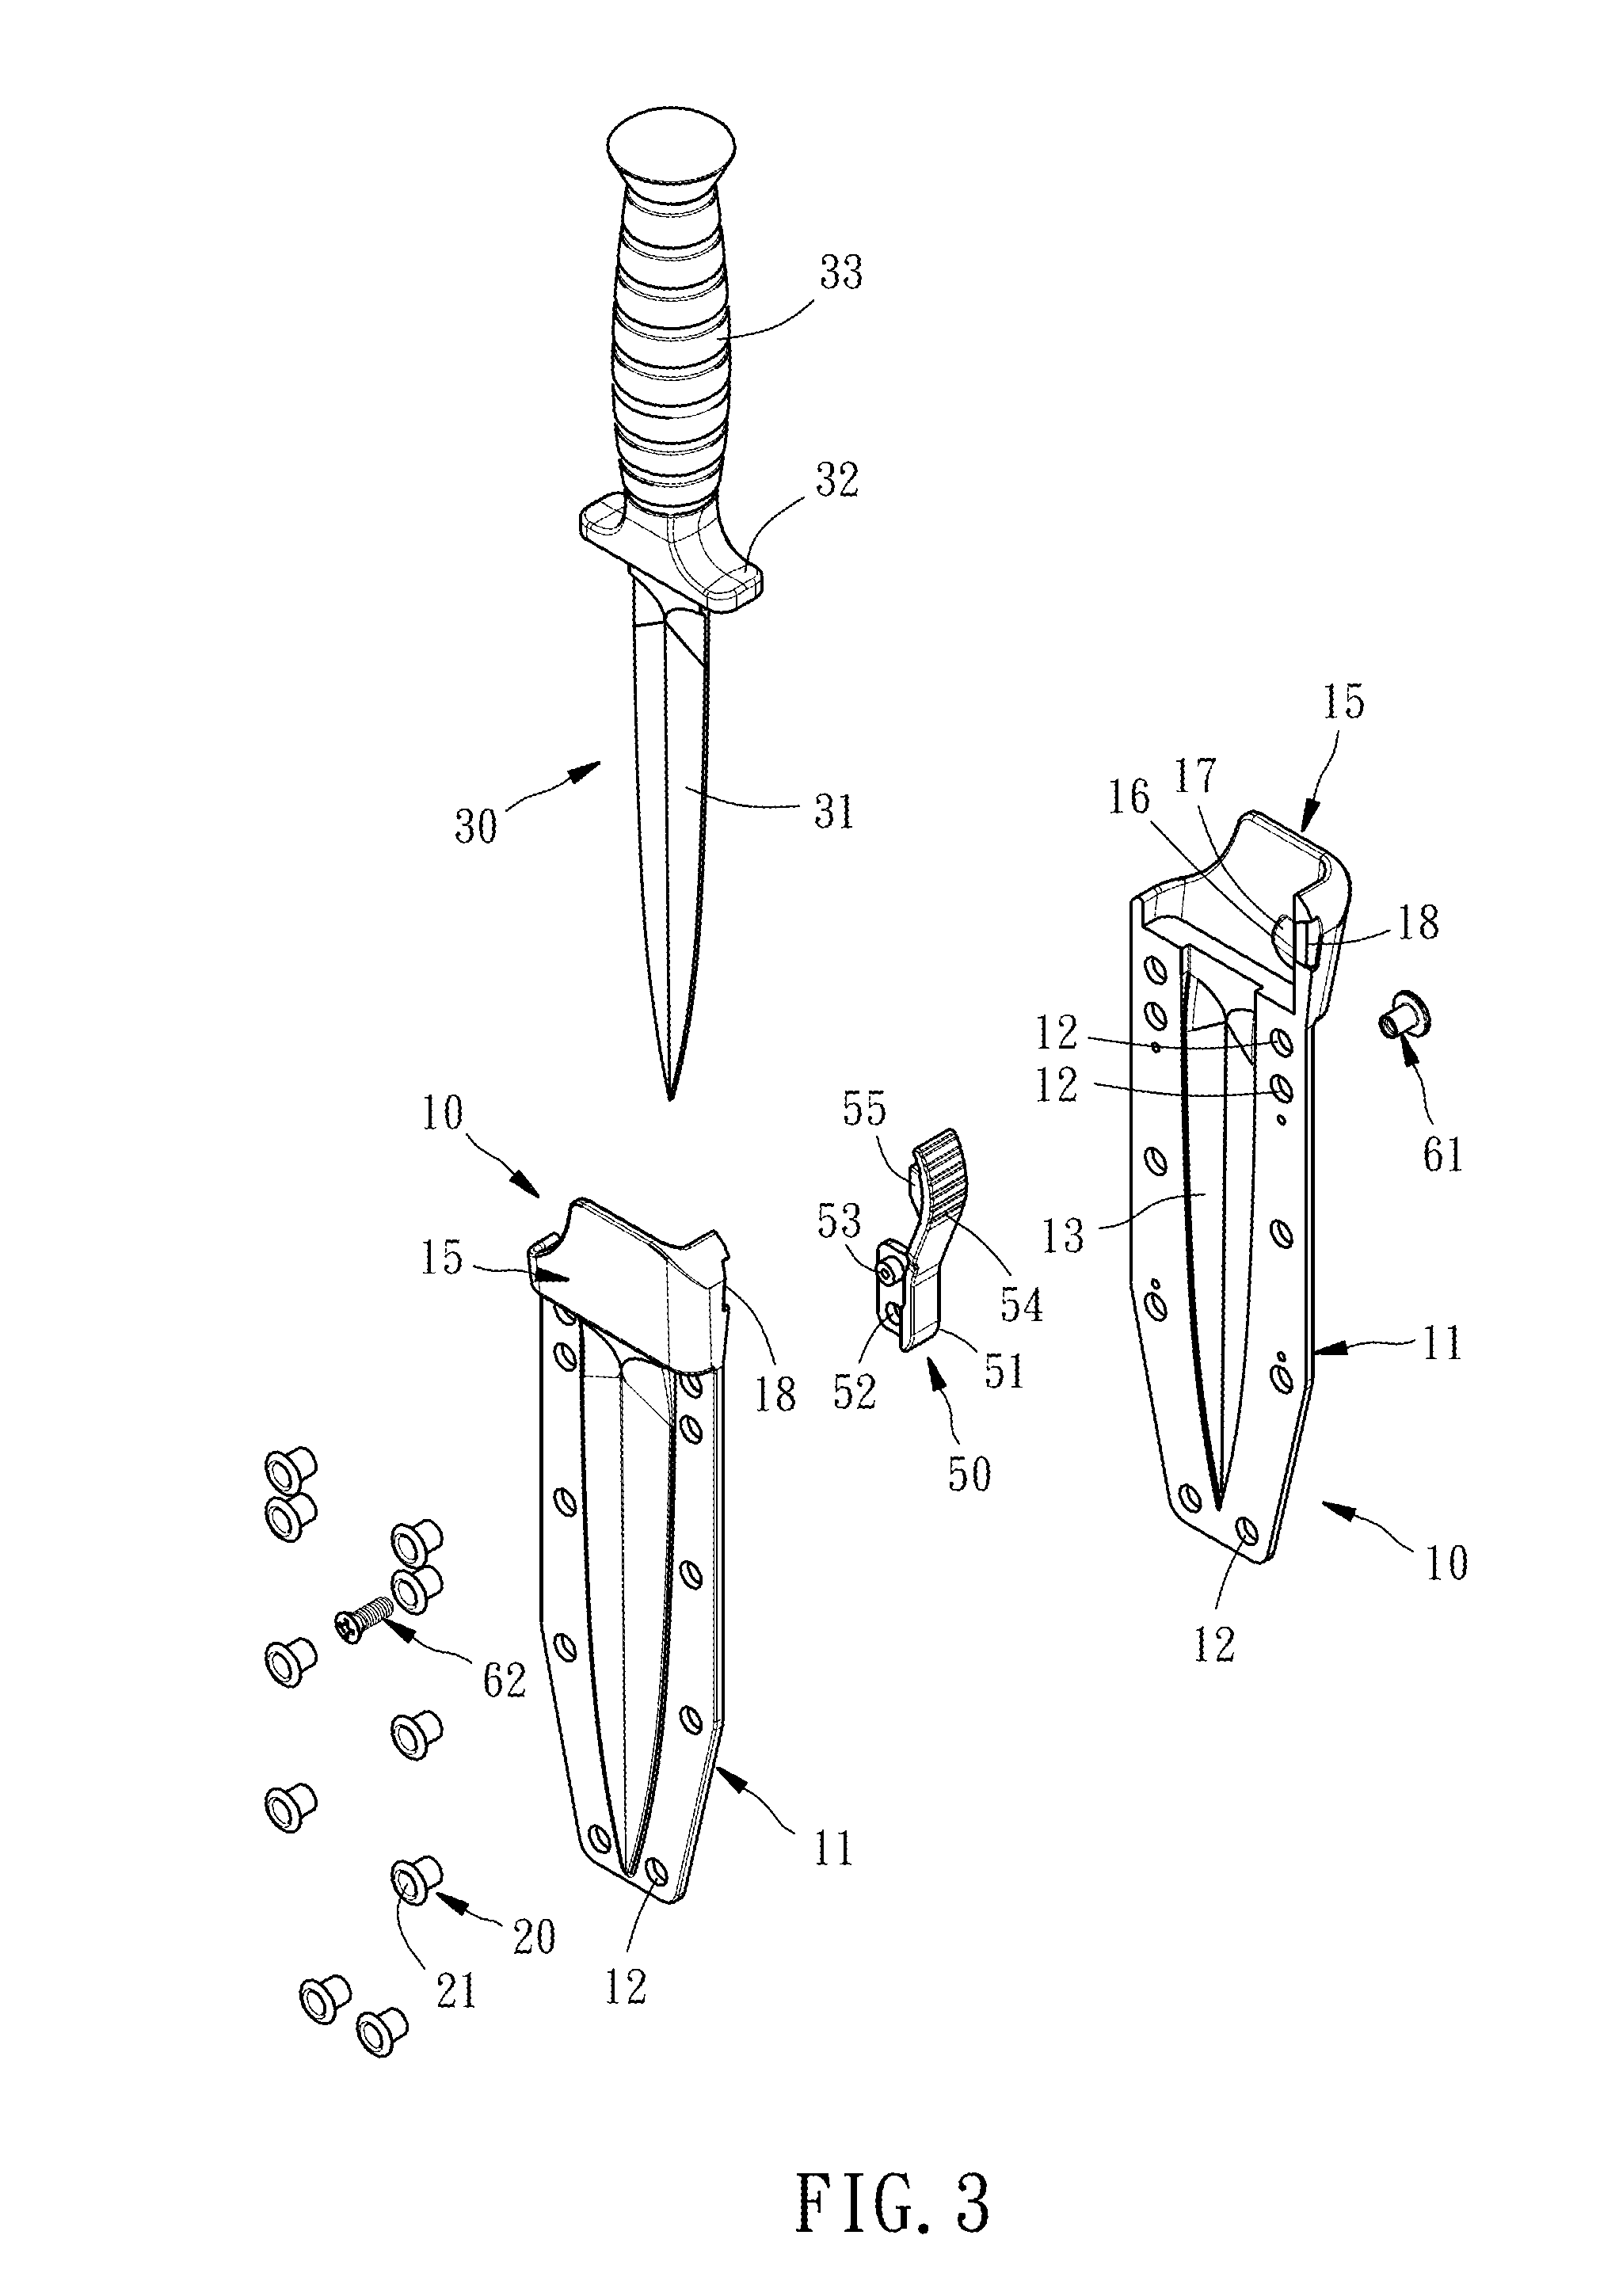 Knife and sheath assembly with realeasable knife securing function